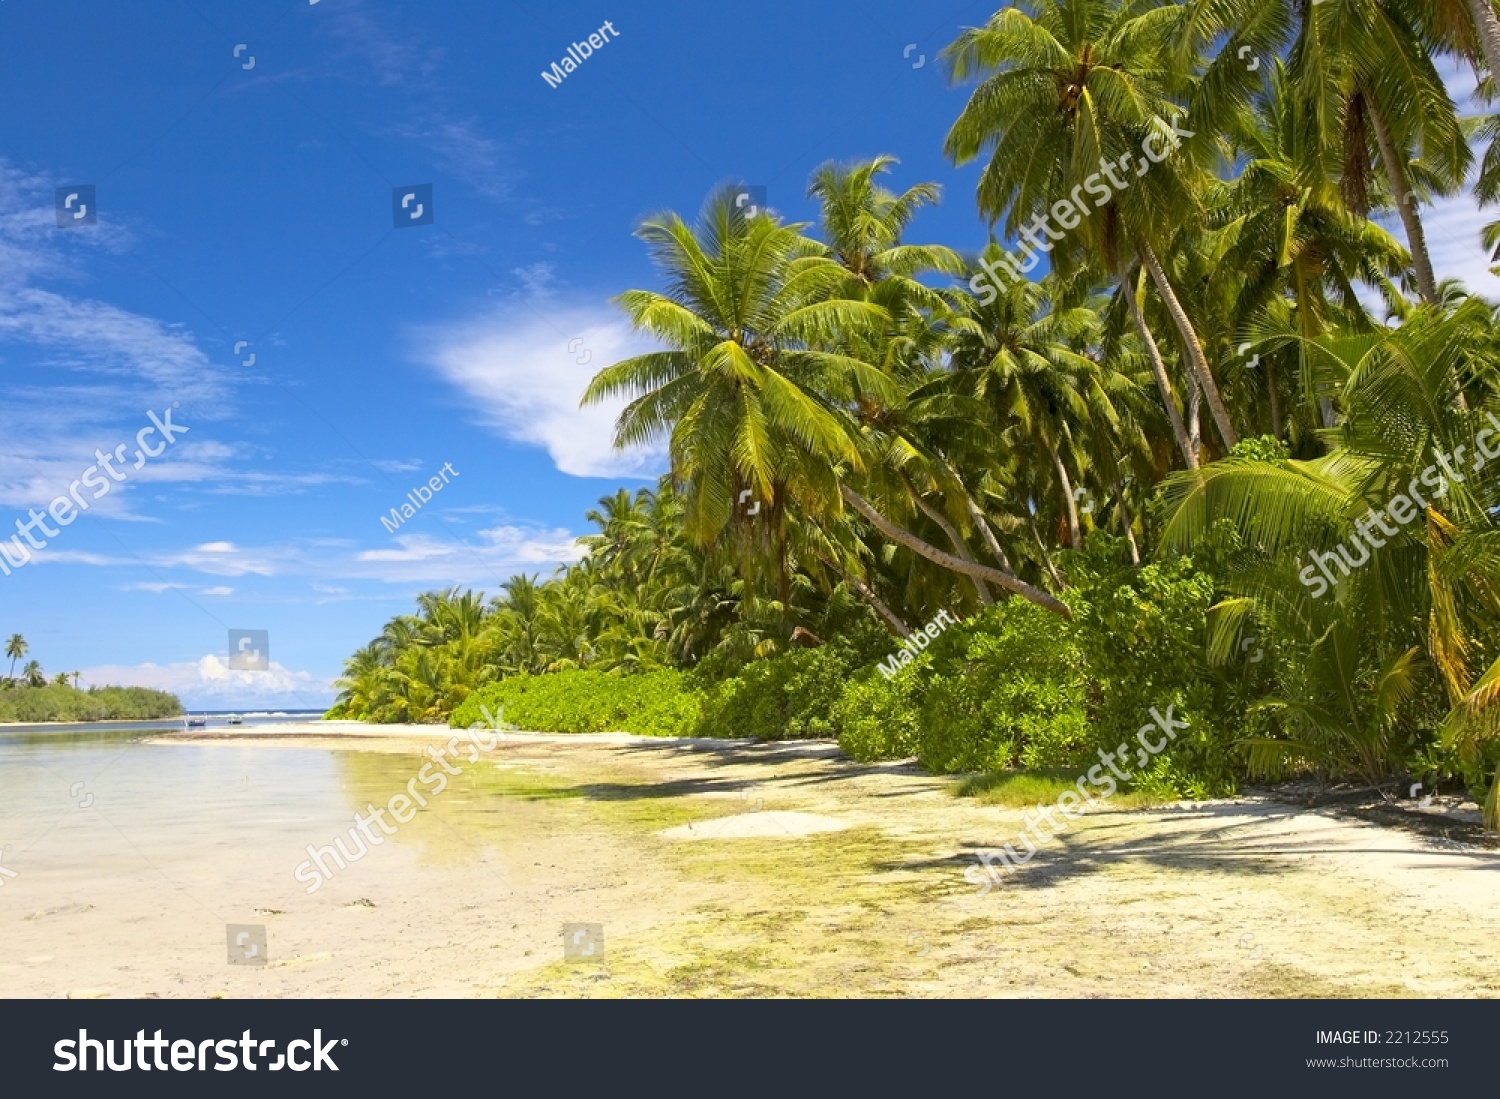 Beautiful Tropical Forest On Beach Indian Stock Photo 2212555 ...